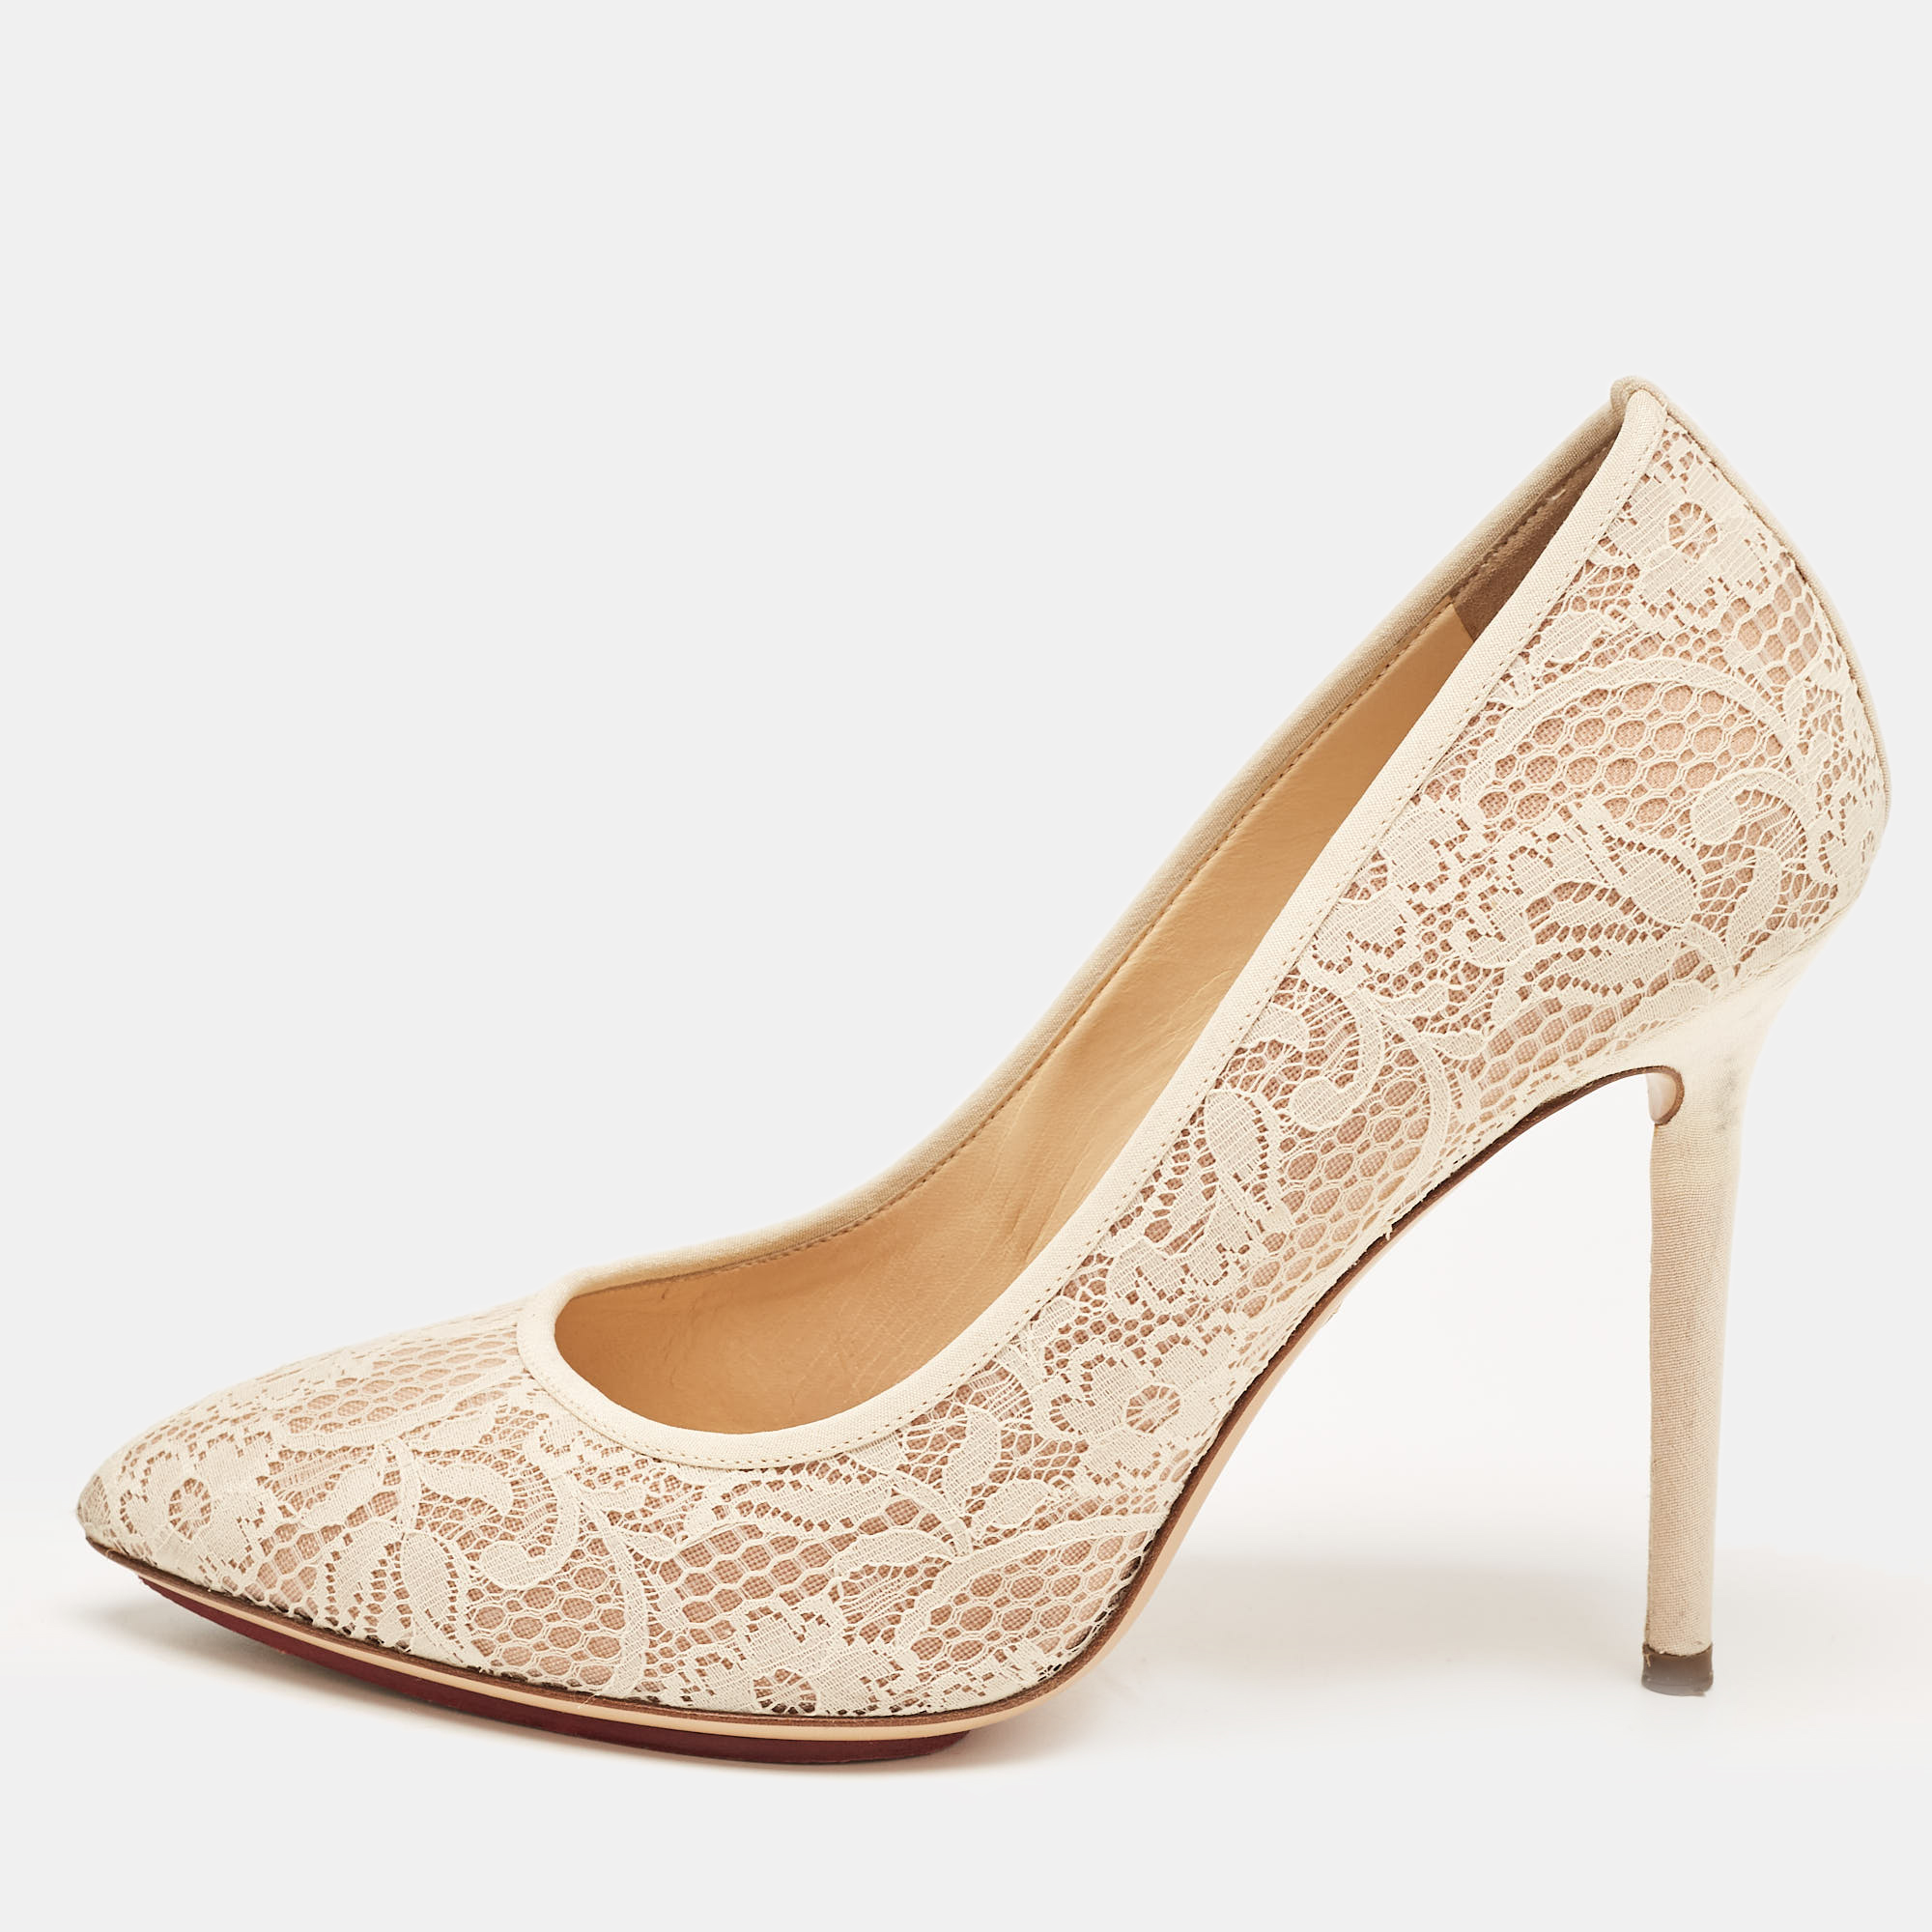 Pre-owned Charlotte Olympia Cream Lace And Satin Monroe Pointed Toe Pumps Size 39